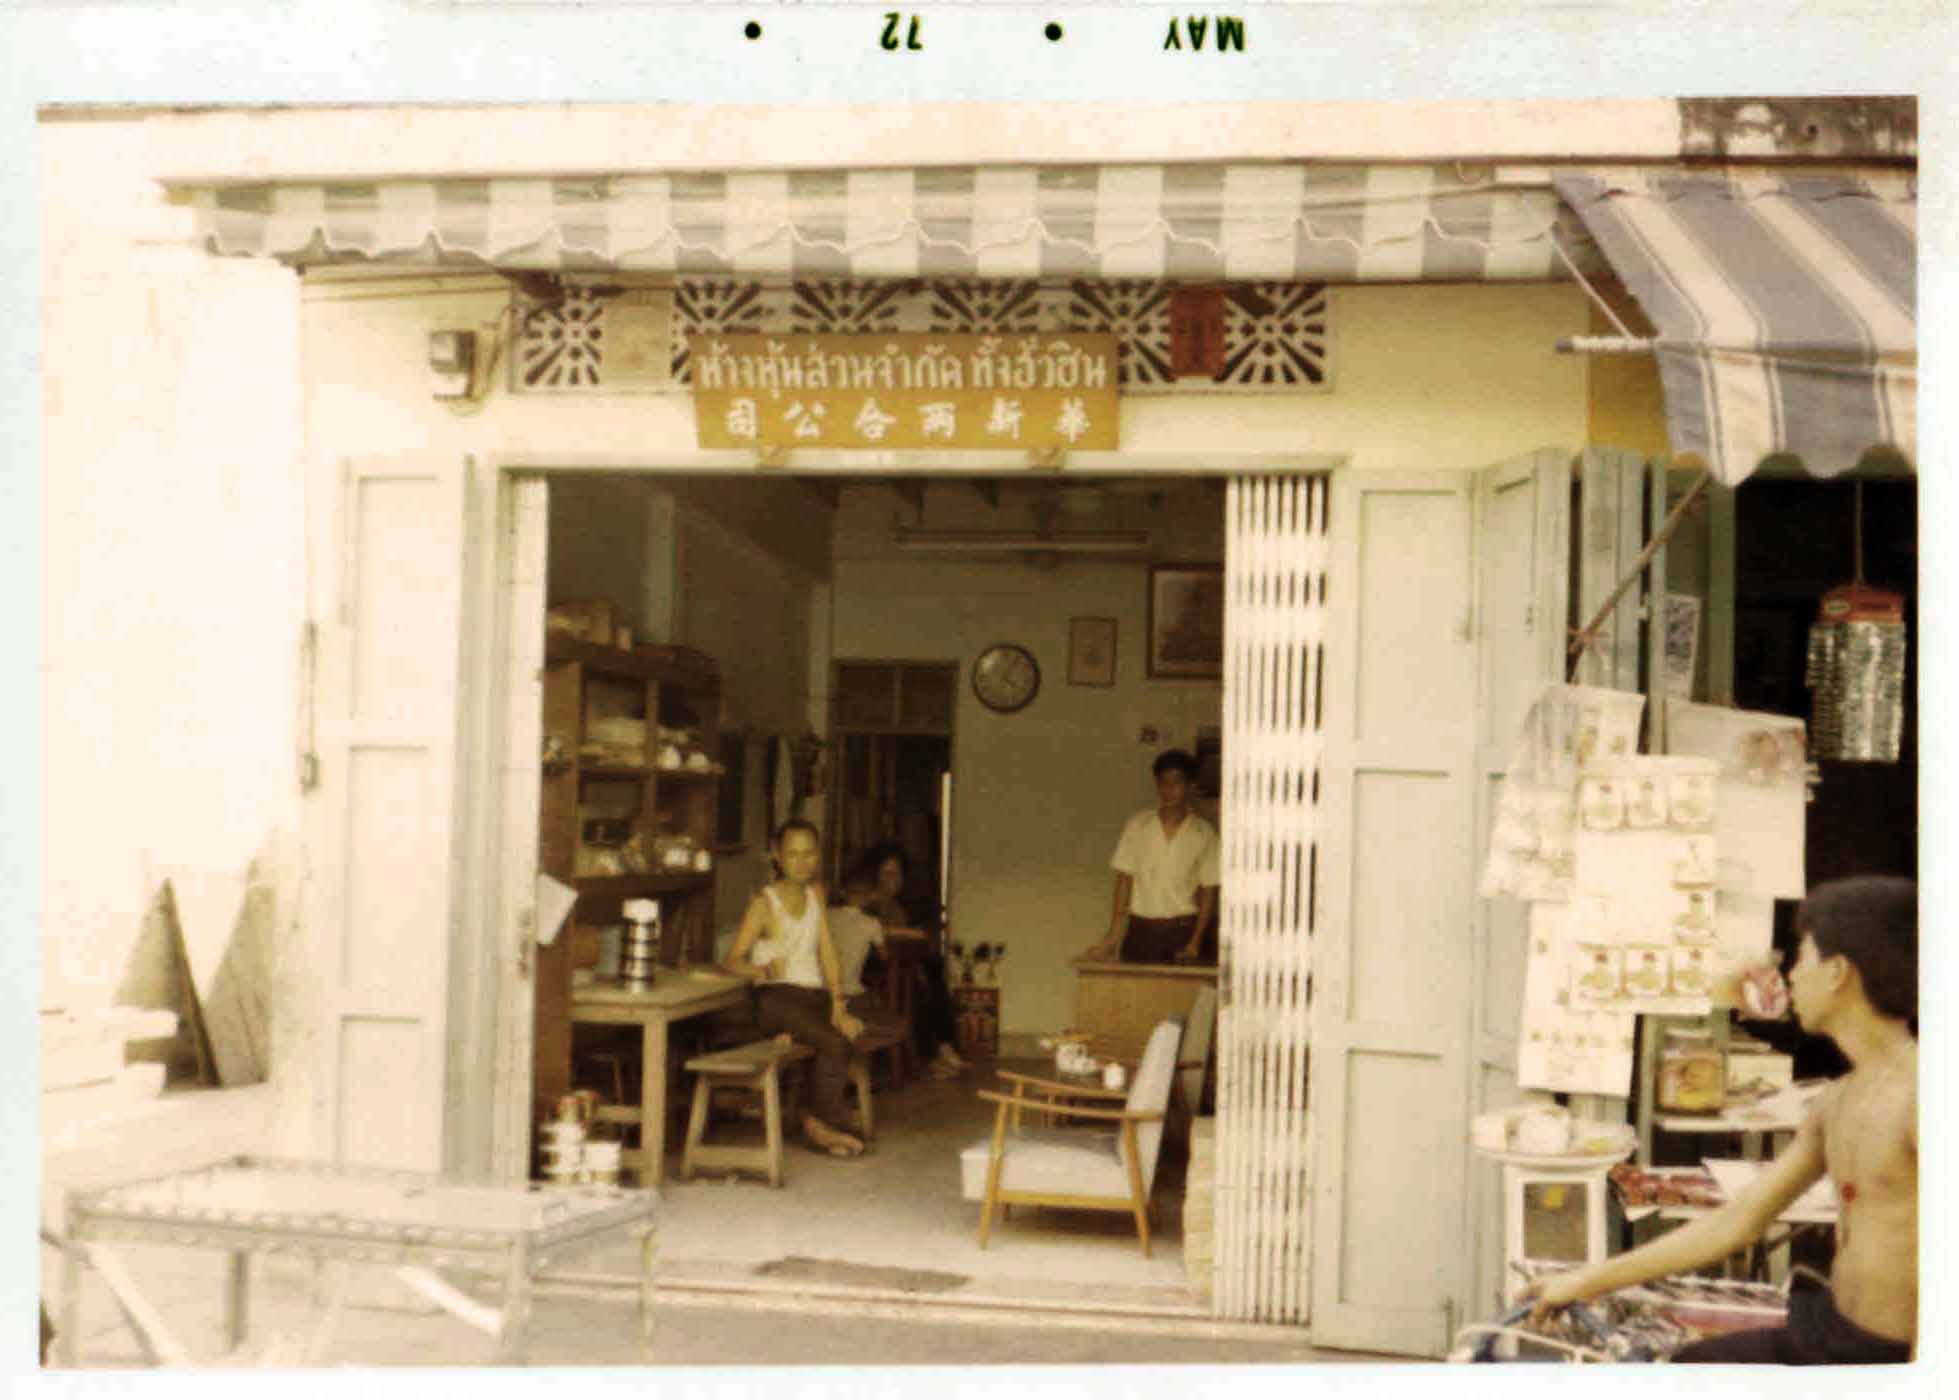 Established in Chinatown, Thung Hua Sinn Print Shop originally sold stationery, schoolbooks, and calendars